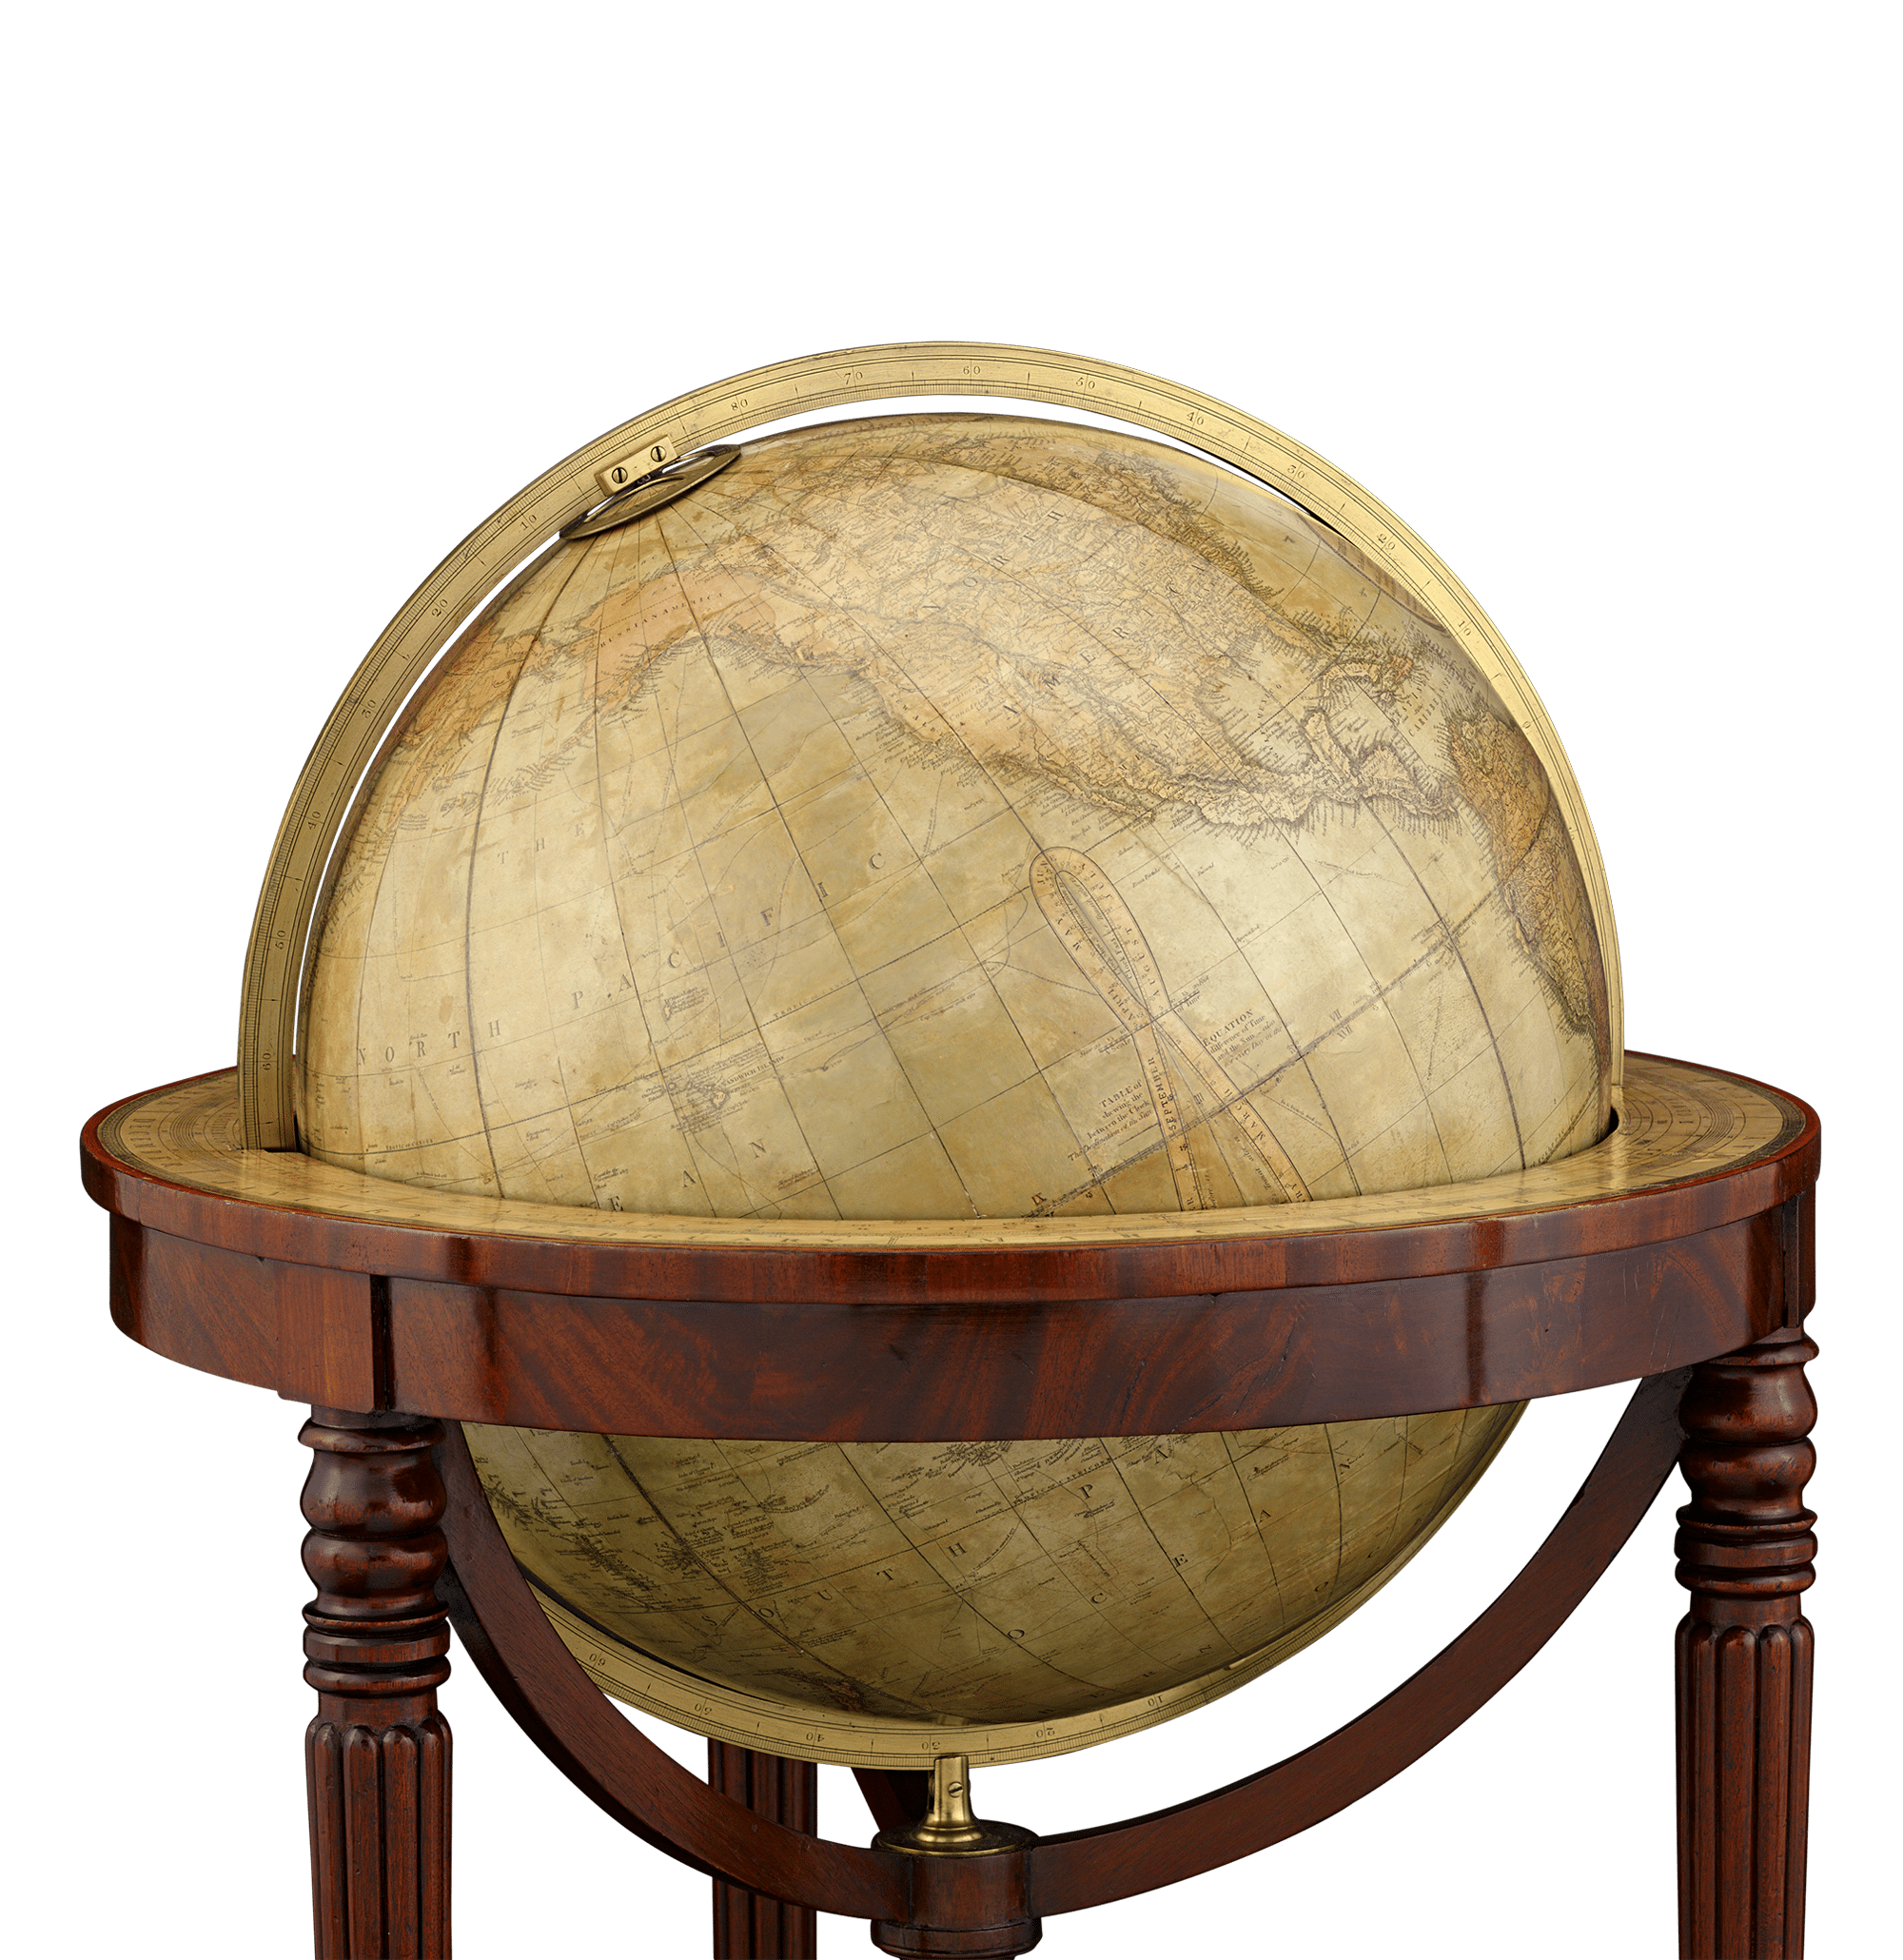 William IV 21-Inch Terrestrial and Celestial Floor Globes by J. W. Cary